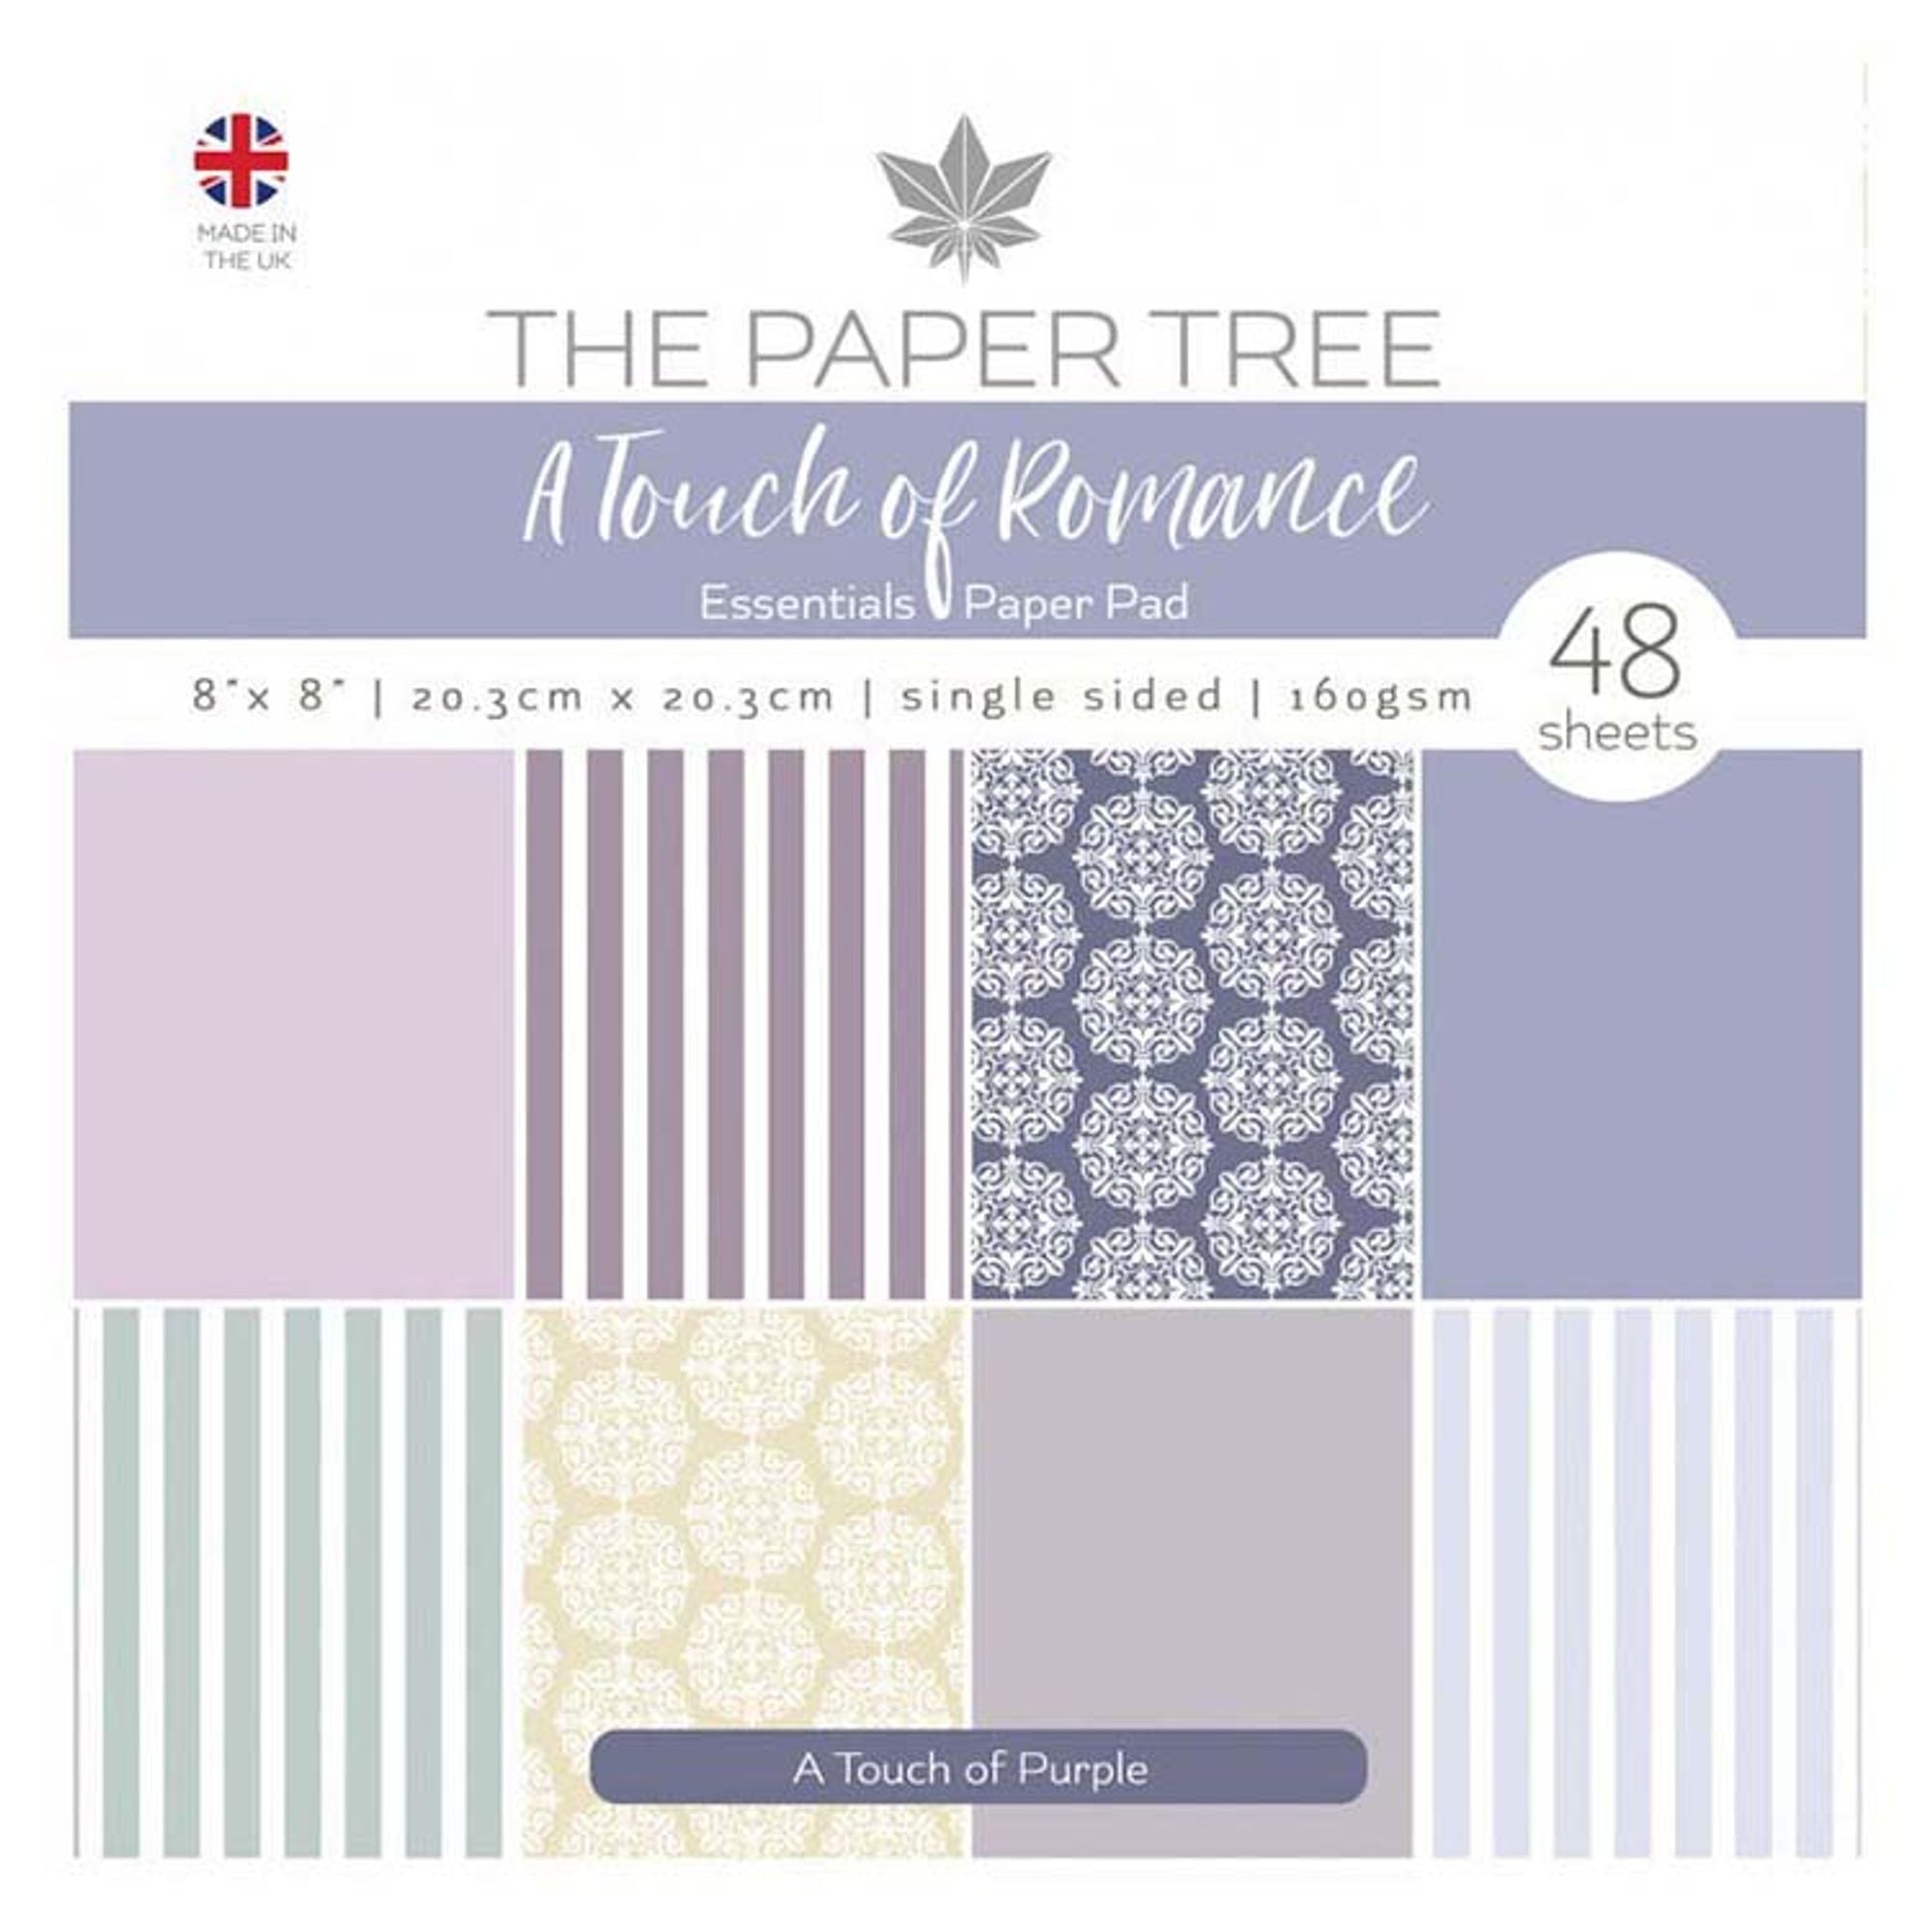 The Paper Tree A Touch of Romance 8x8 Essentials Pad - A Touch of Purple